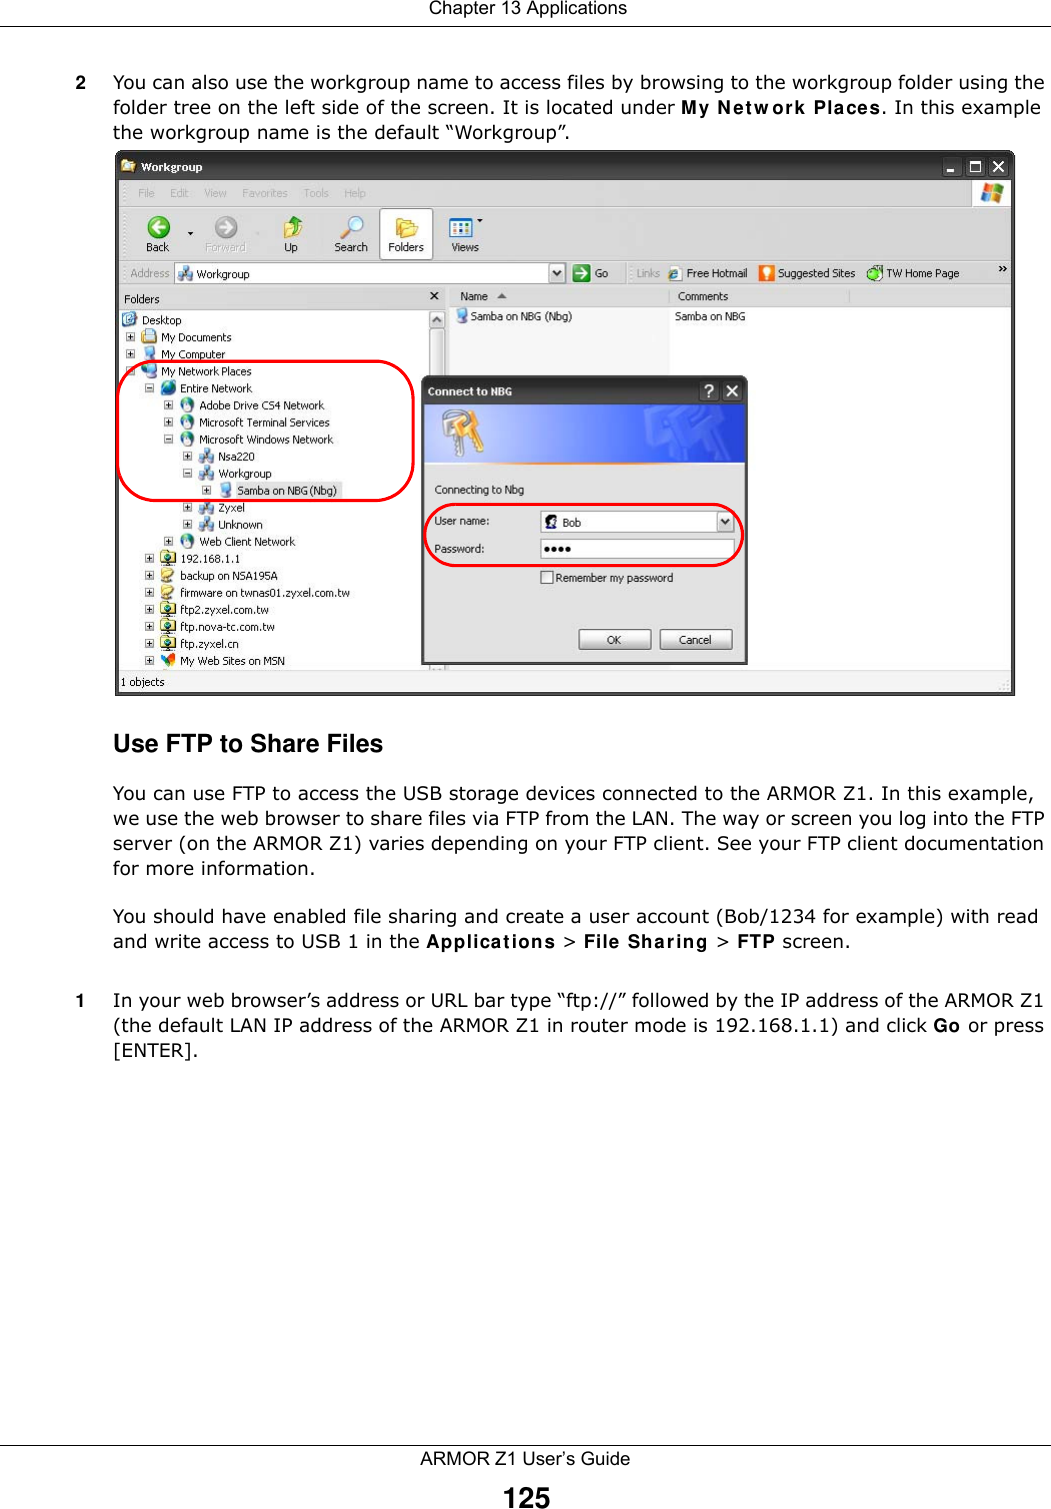  Chapter 13 ApplicationsARMOR Z1 User’s Guide1252You can also use the workgroup name to access files by browsing to the workgroup folder using the folder tree on the left side of the screen. It is located under My Network Places. In this example the workgroup name is the default “Workgroup”. Use FTP to Share FilesYou can use FTP to access the USB storage devices connected to the ARMOR Z1. In this example, we use the web browser to share files via FTP from the LAN. The way or screen you log into the FTP server (on the ARMOR Z1) varies depending on your FTP client. See your FTP client documentation for more information. You should have enabled file sharing and create a user account (Bob/1234 for example) with read and write access to USB 1 in the Applications &gt; File Sharing &gt; FTP screen.1In your web browser’s address or URL bar type “ftp://” followed by the IP address of the ARMOR Z1 (the default LAN IP address of the ARMOR Z1 in router mode is 192.168.1.1) and click Go or press [ENTER].